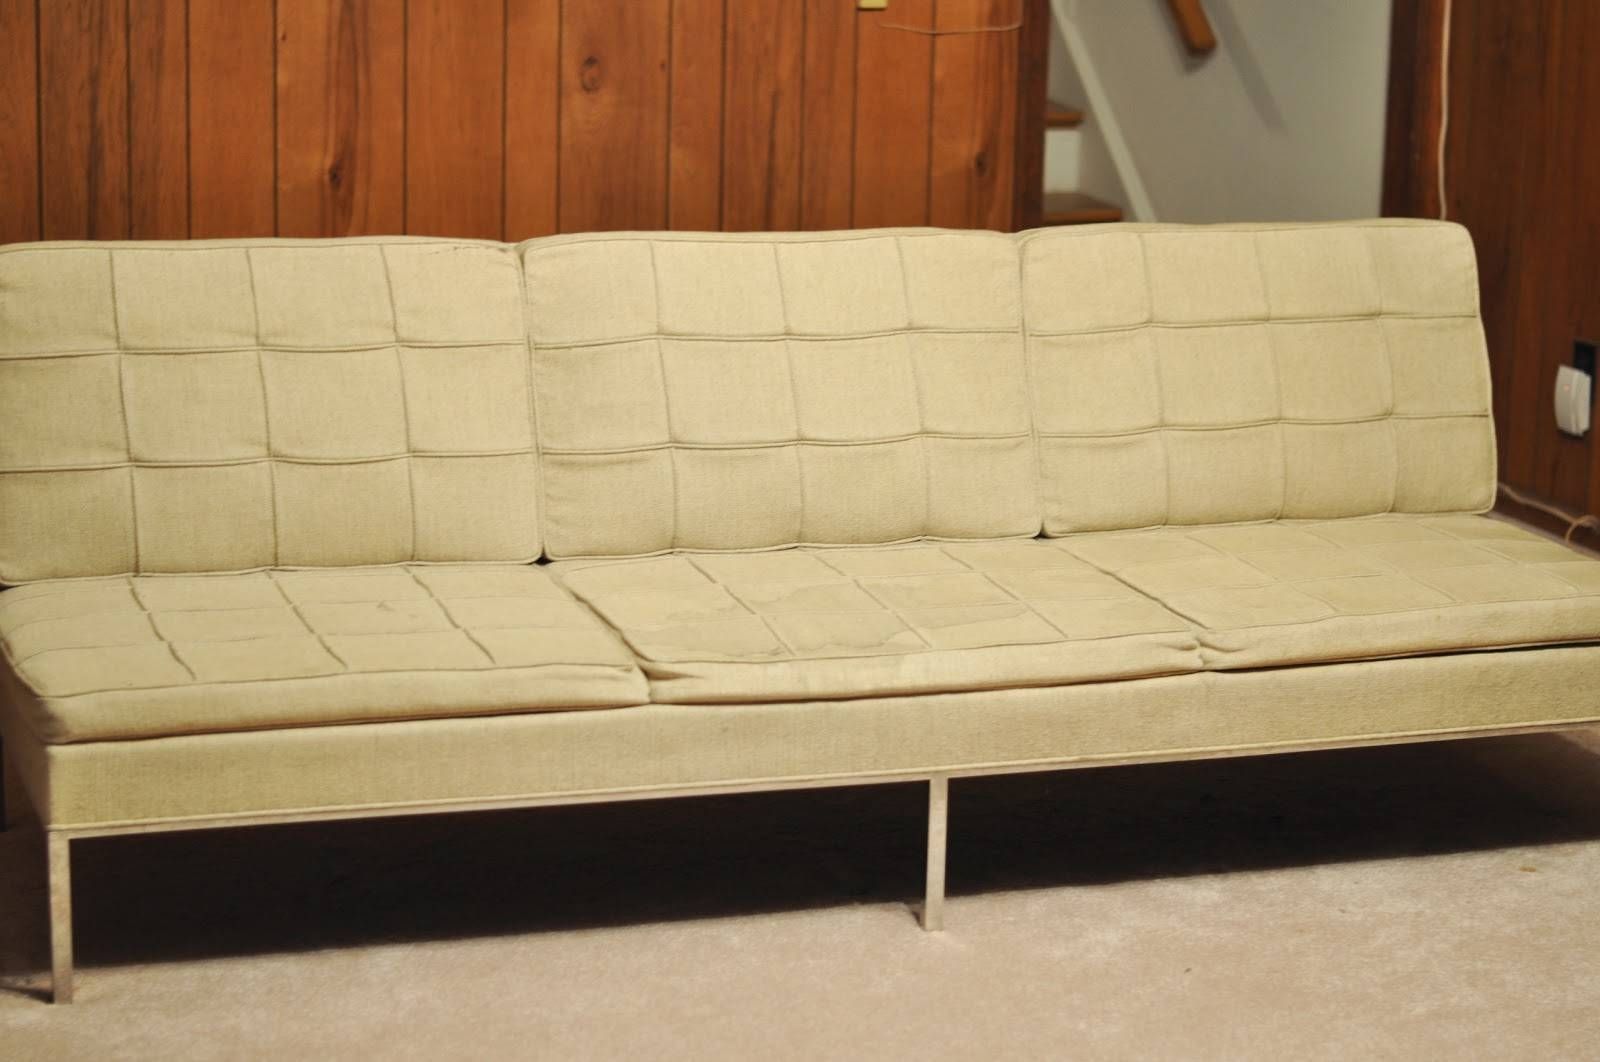 A Treasure In Storage: The Florence Knoll Sofa Comes Home | The Intended For Florence Medium Sofas (View 6 of 25)